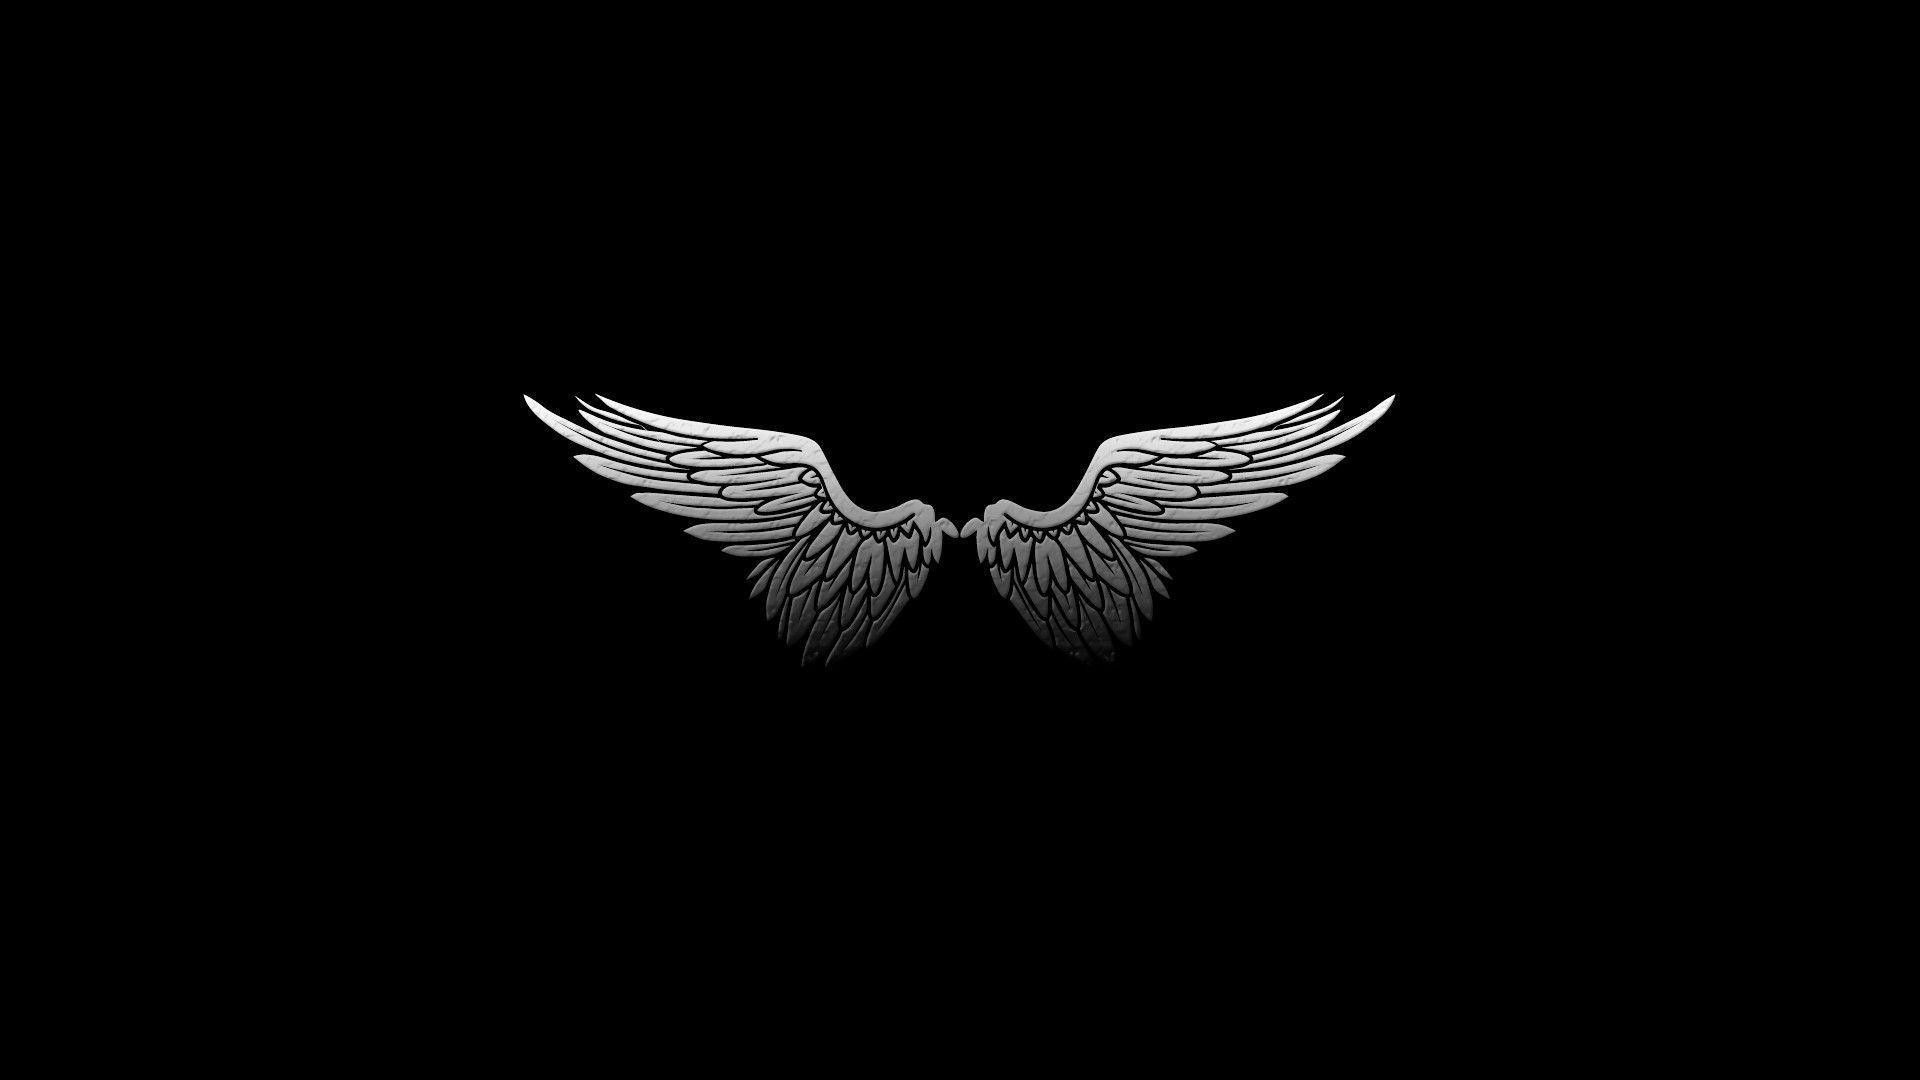 A pair of wings on a black background - Wings